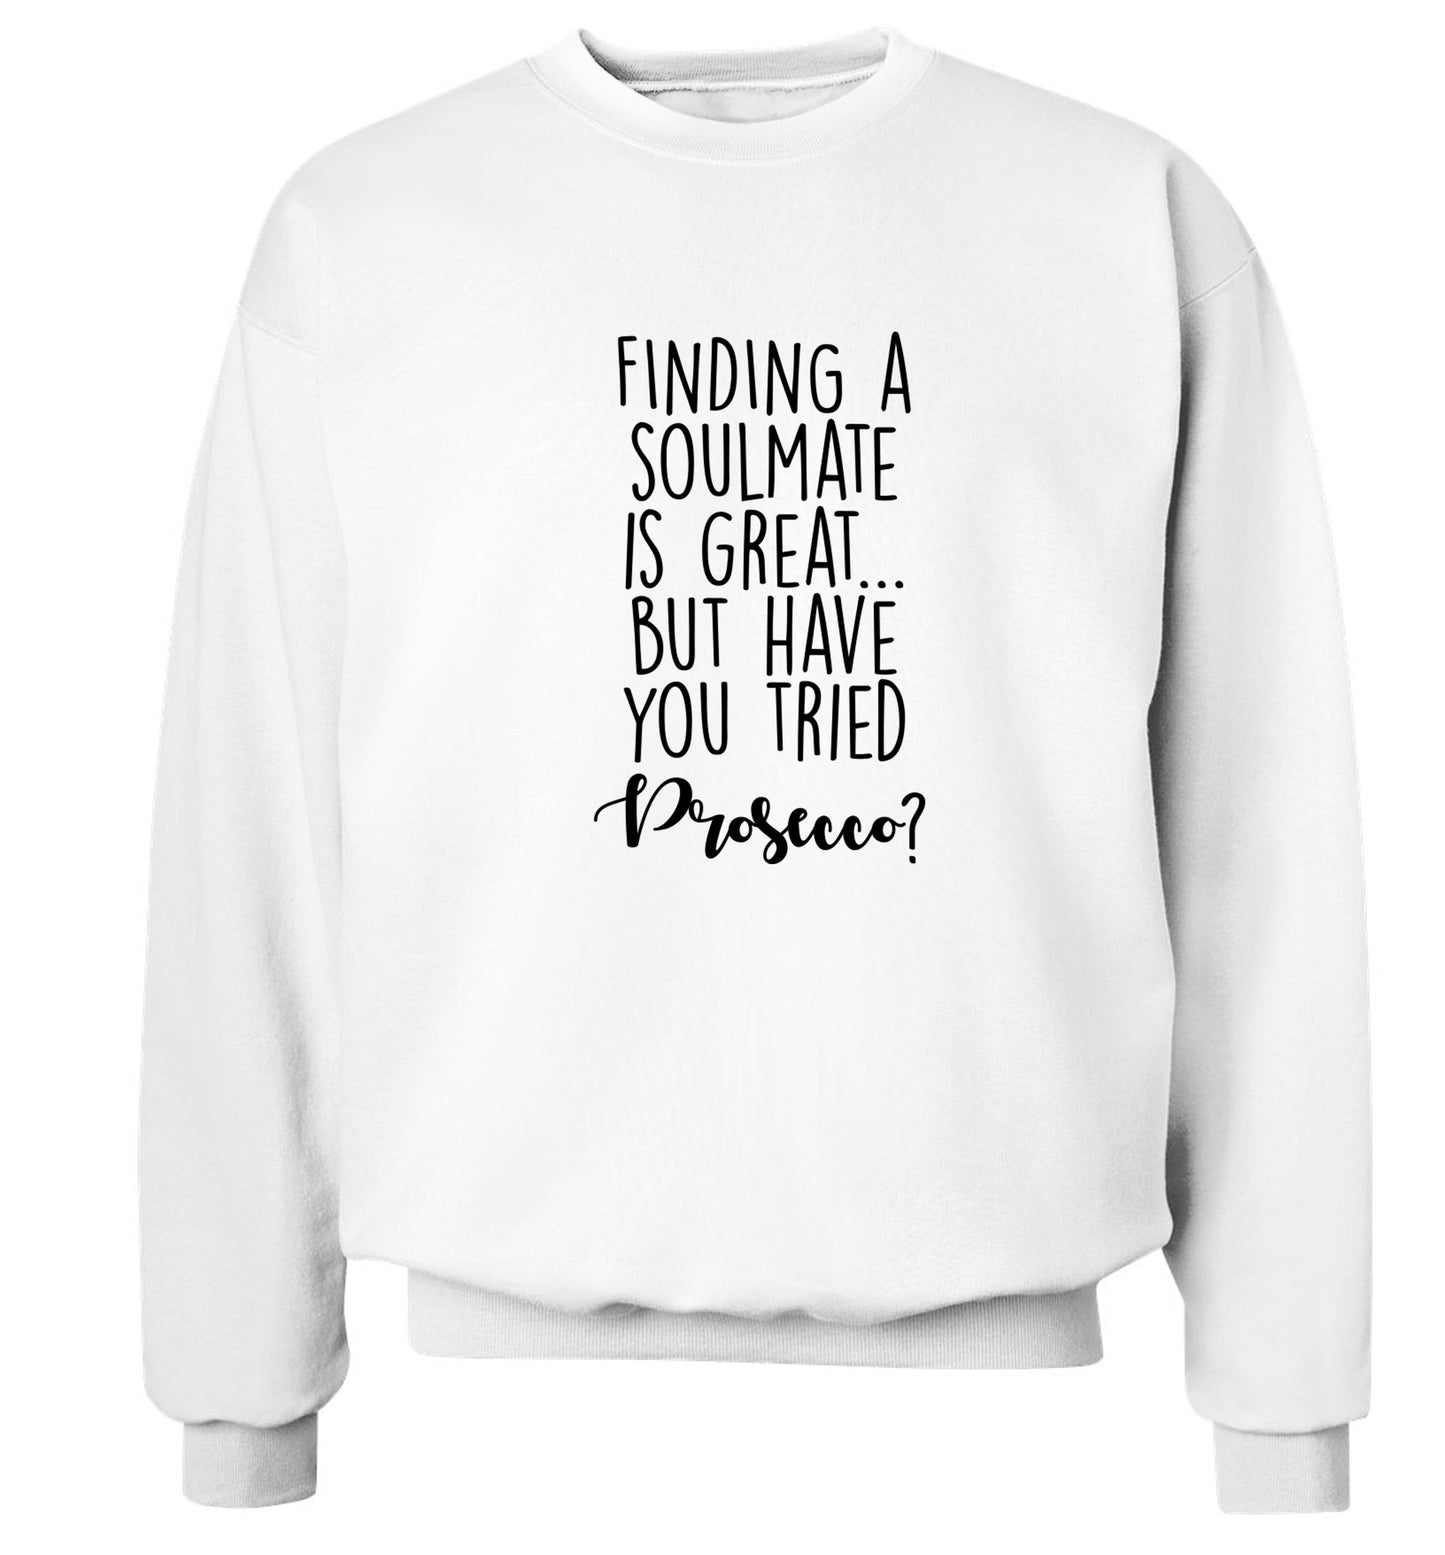 Finding a soulmate is great but have you tried prosecco? Adult's unisex white Sweater 2XL